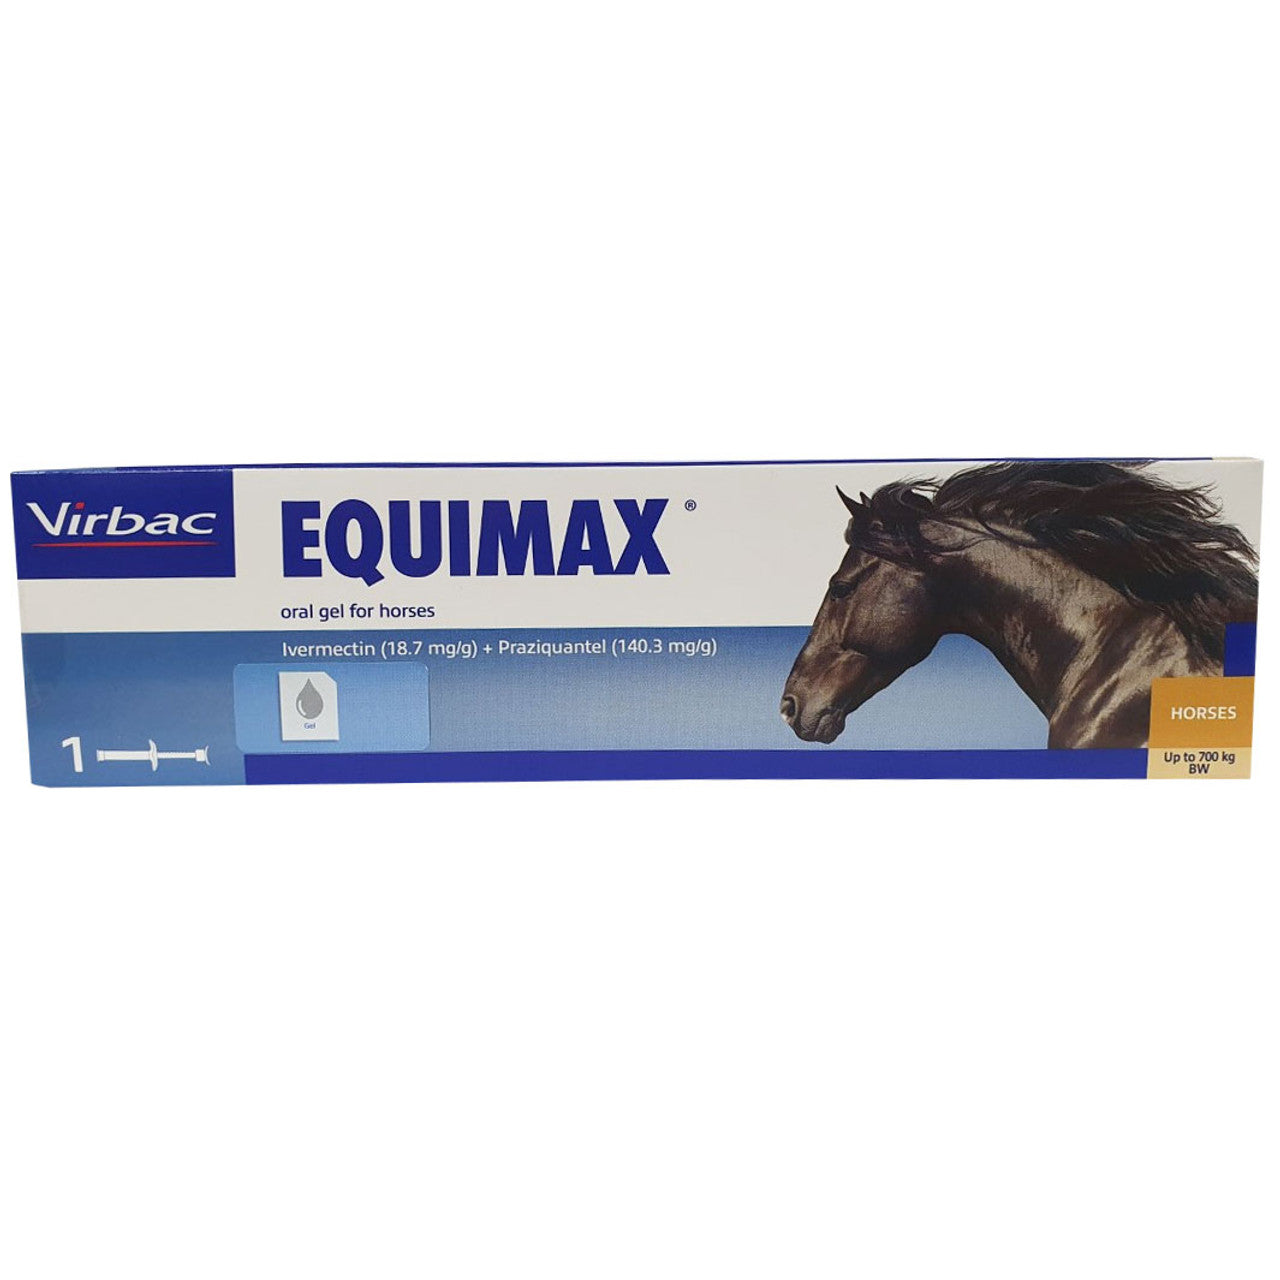 Equimax horse wormer